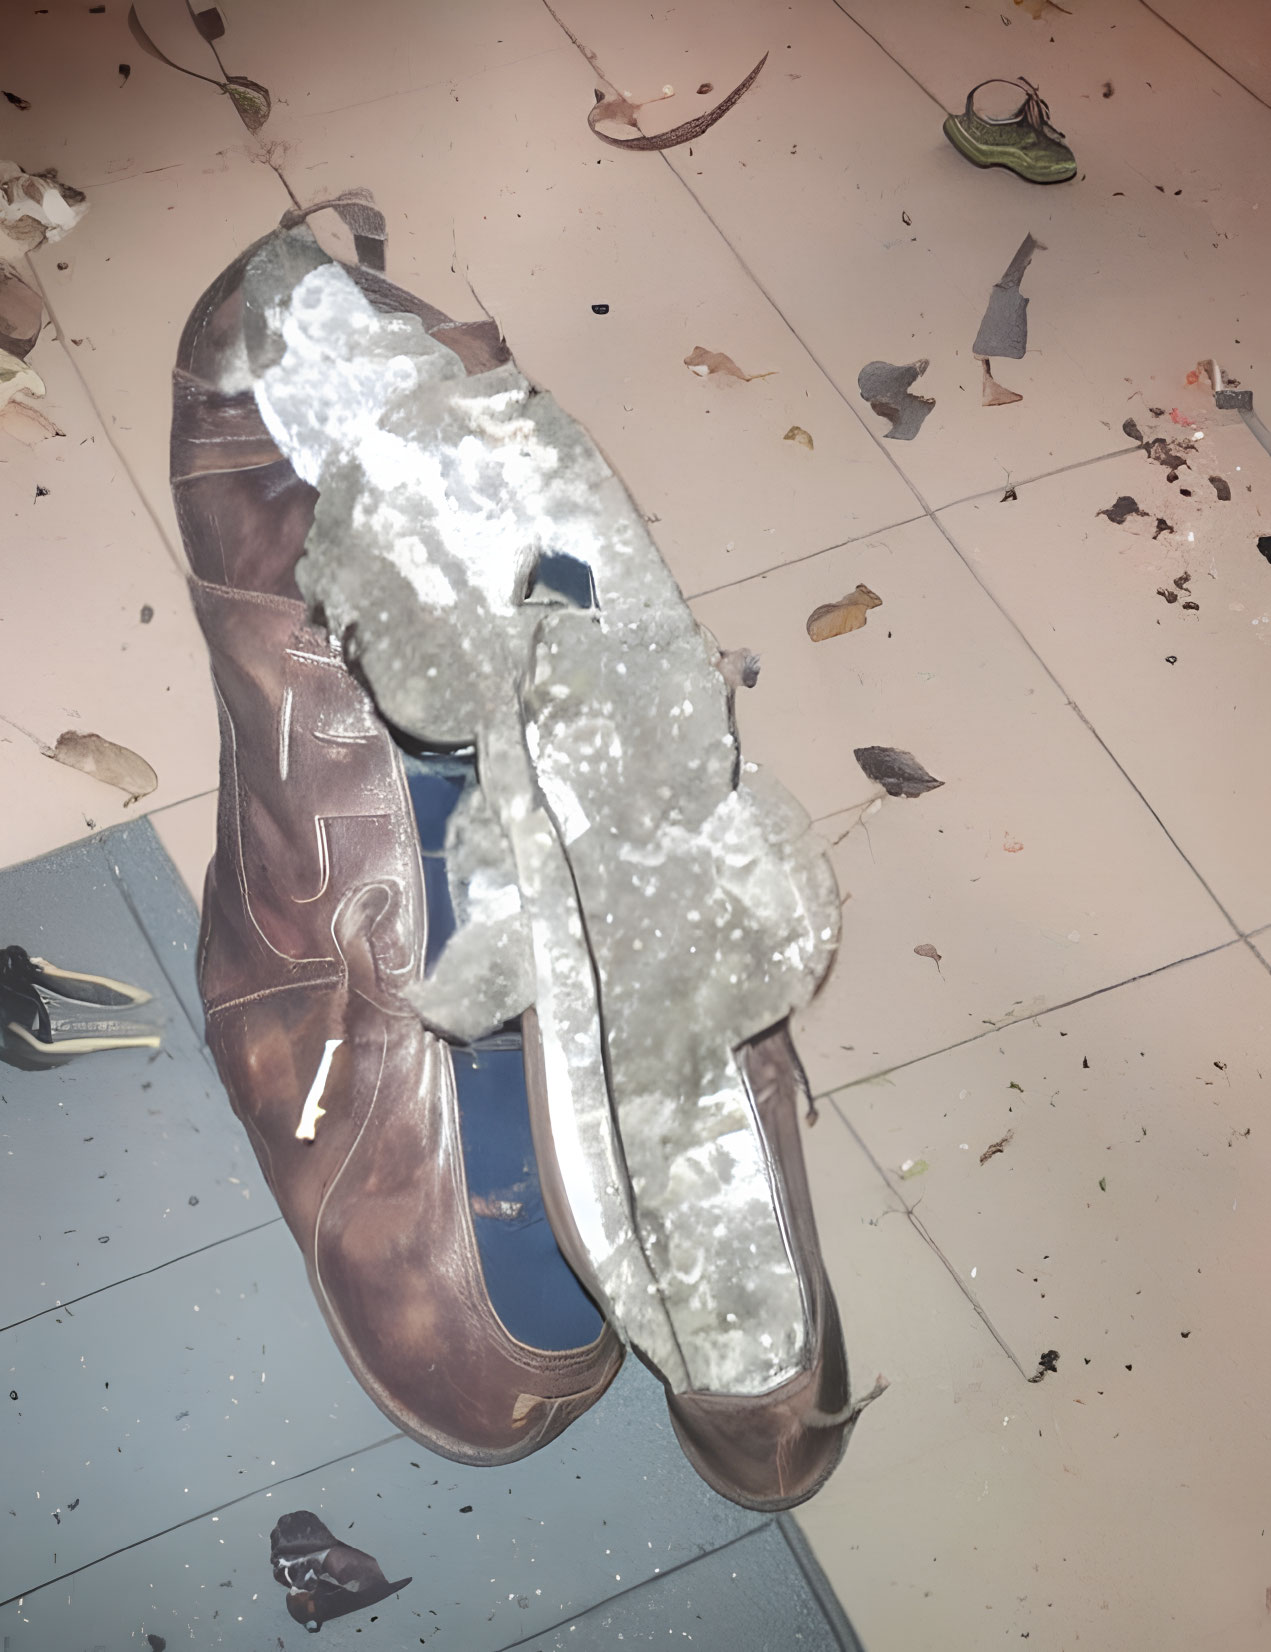 Damaged brown shoe on dirty floor with debris.